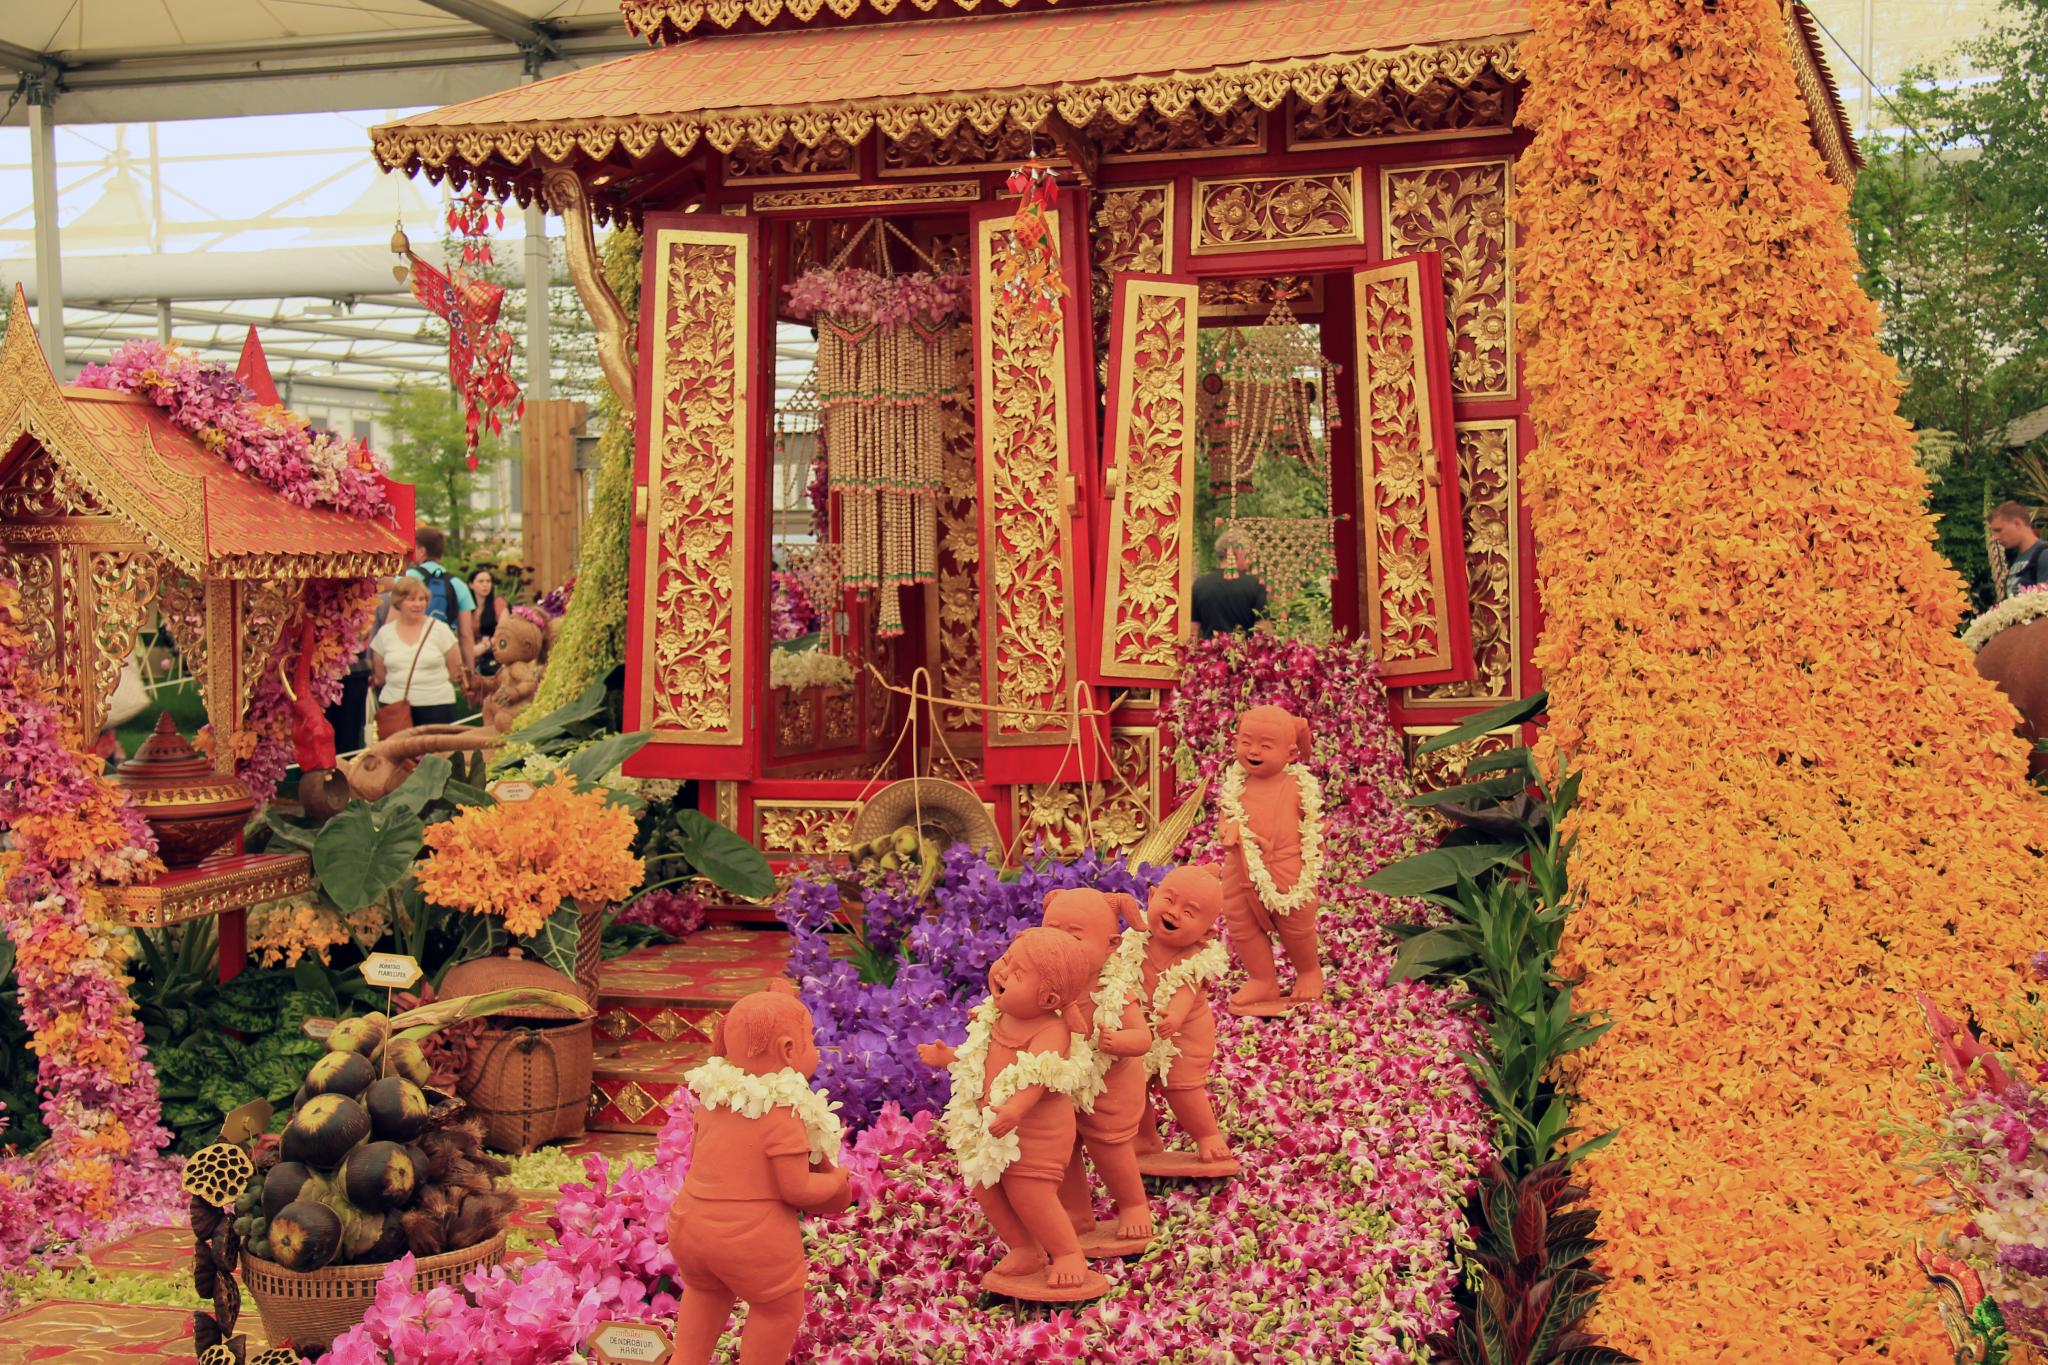 a flower festival with figurines in elaborate floral arrangements